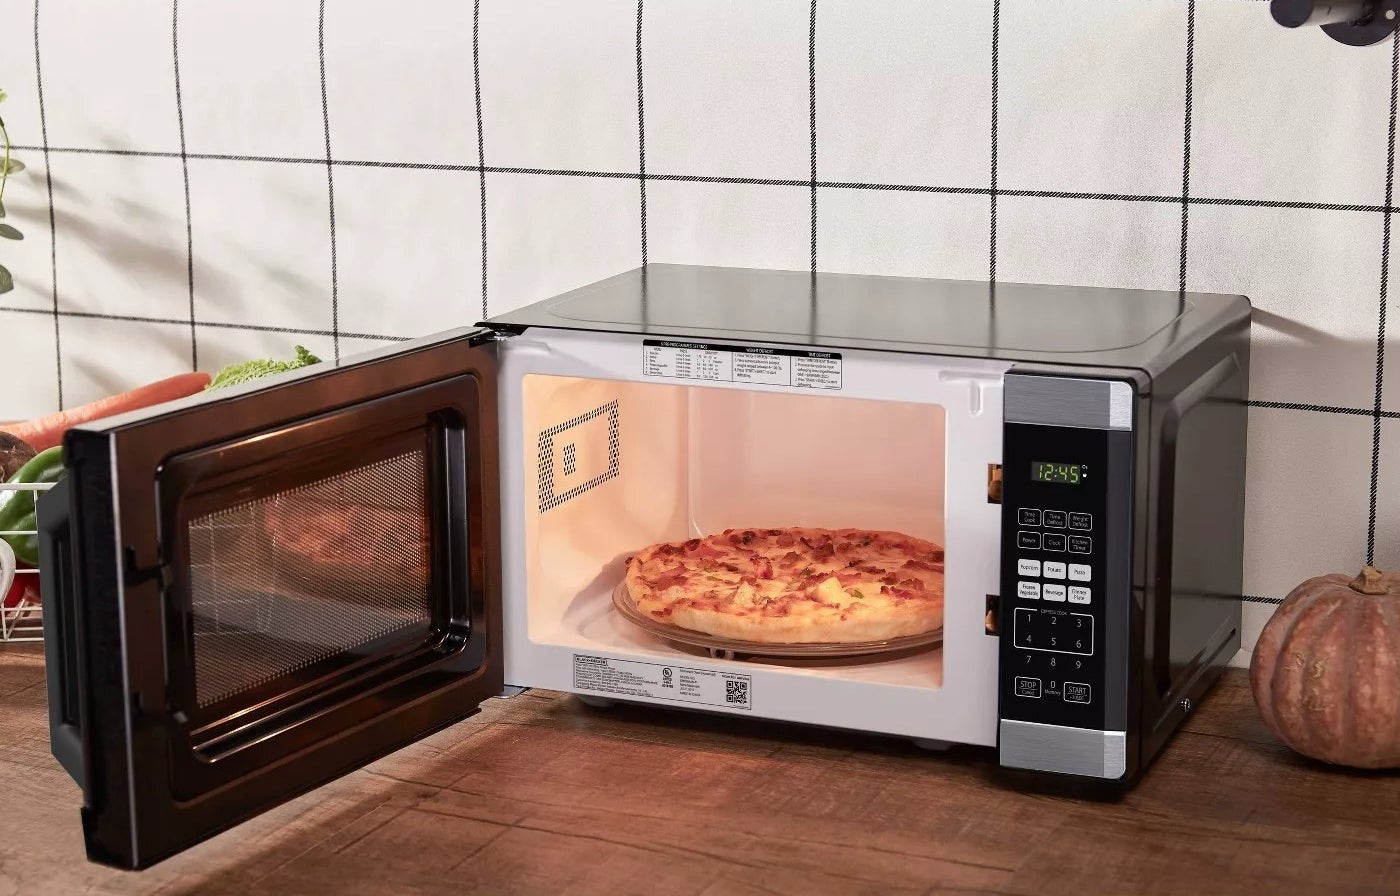 A pizza on the microwave&#x27;s turntable